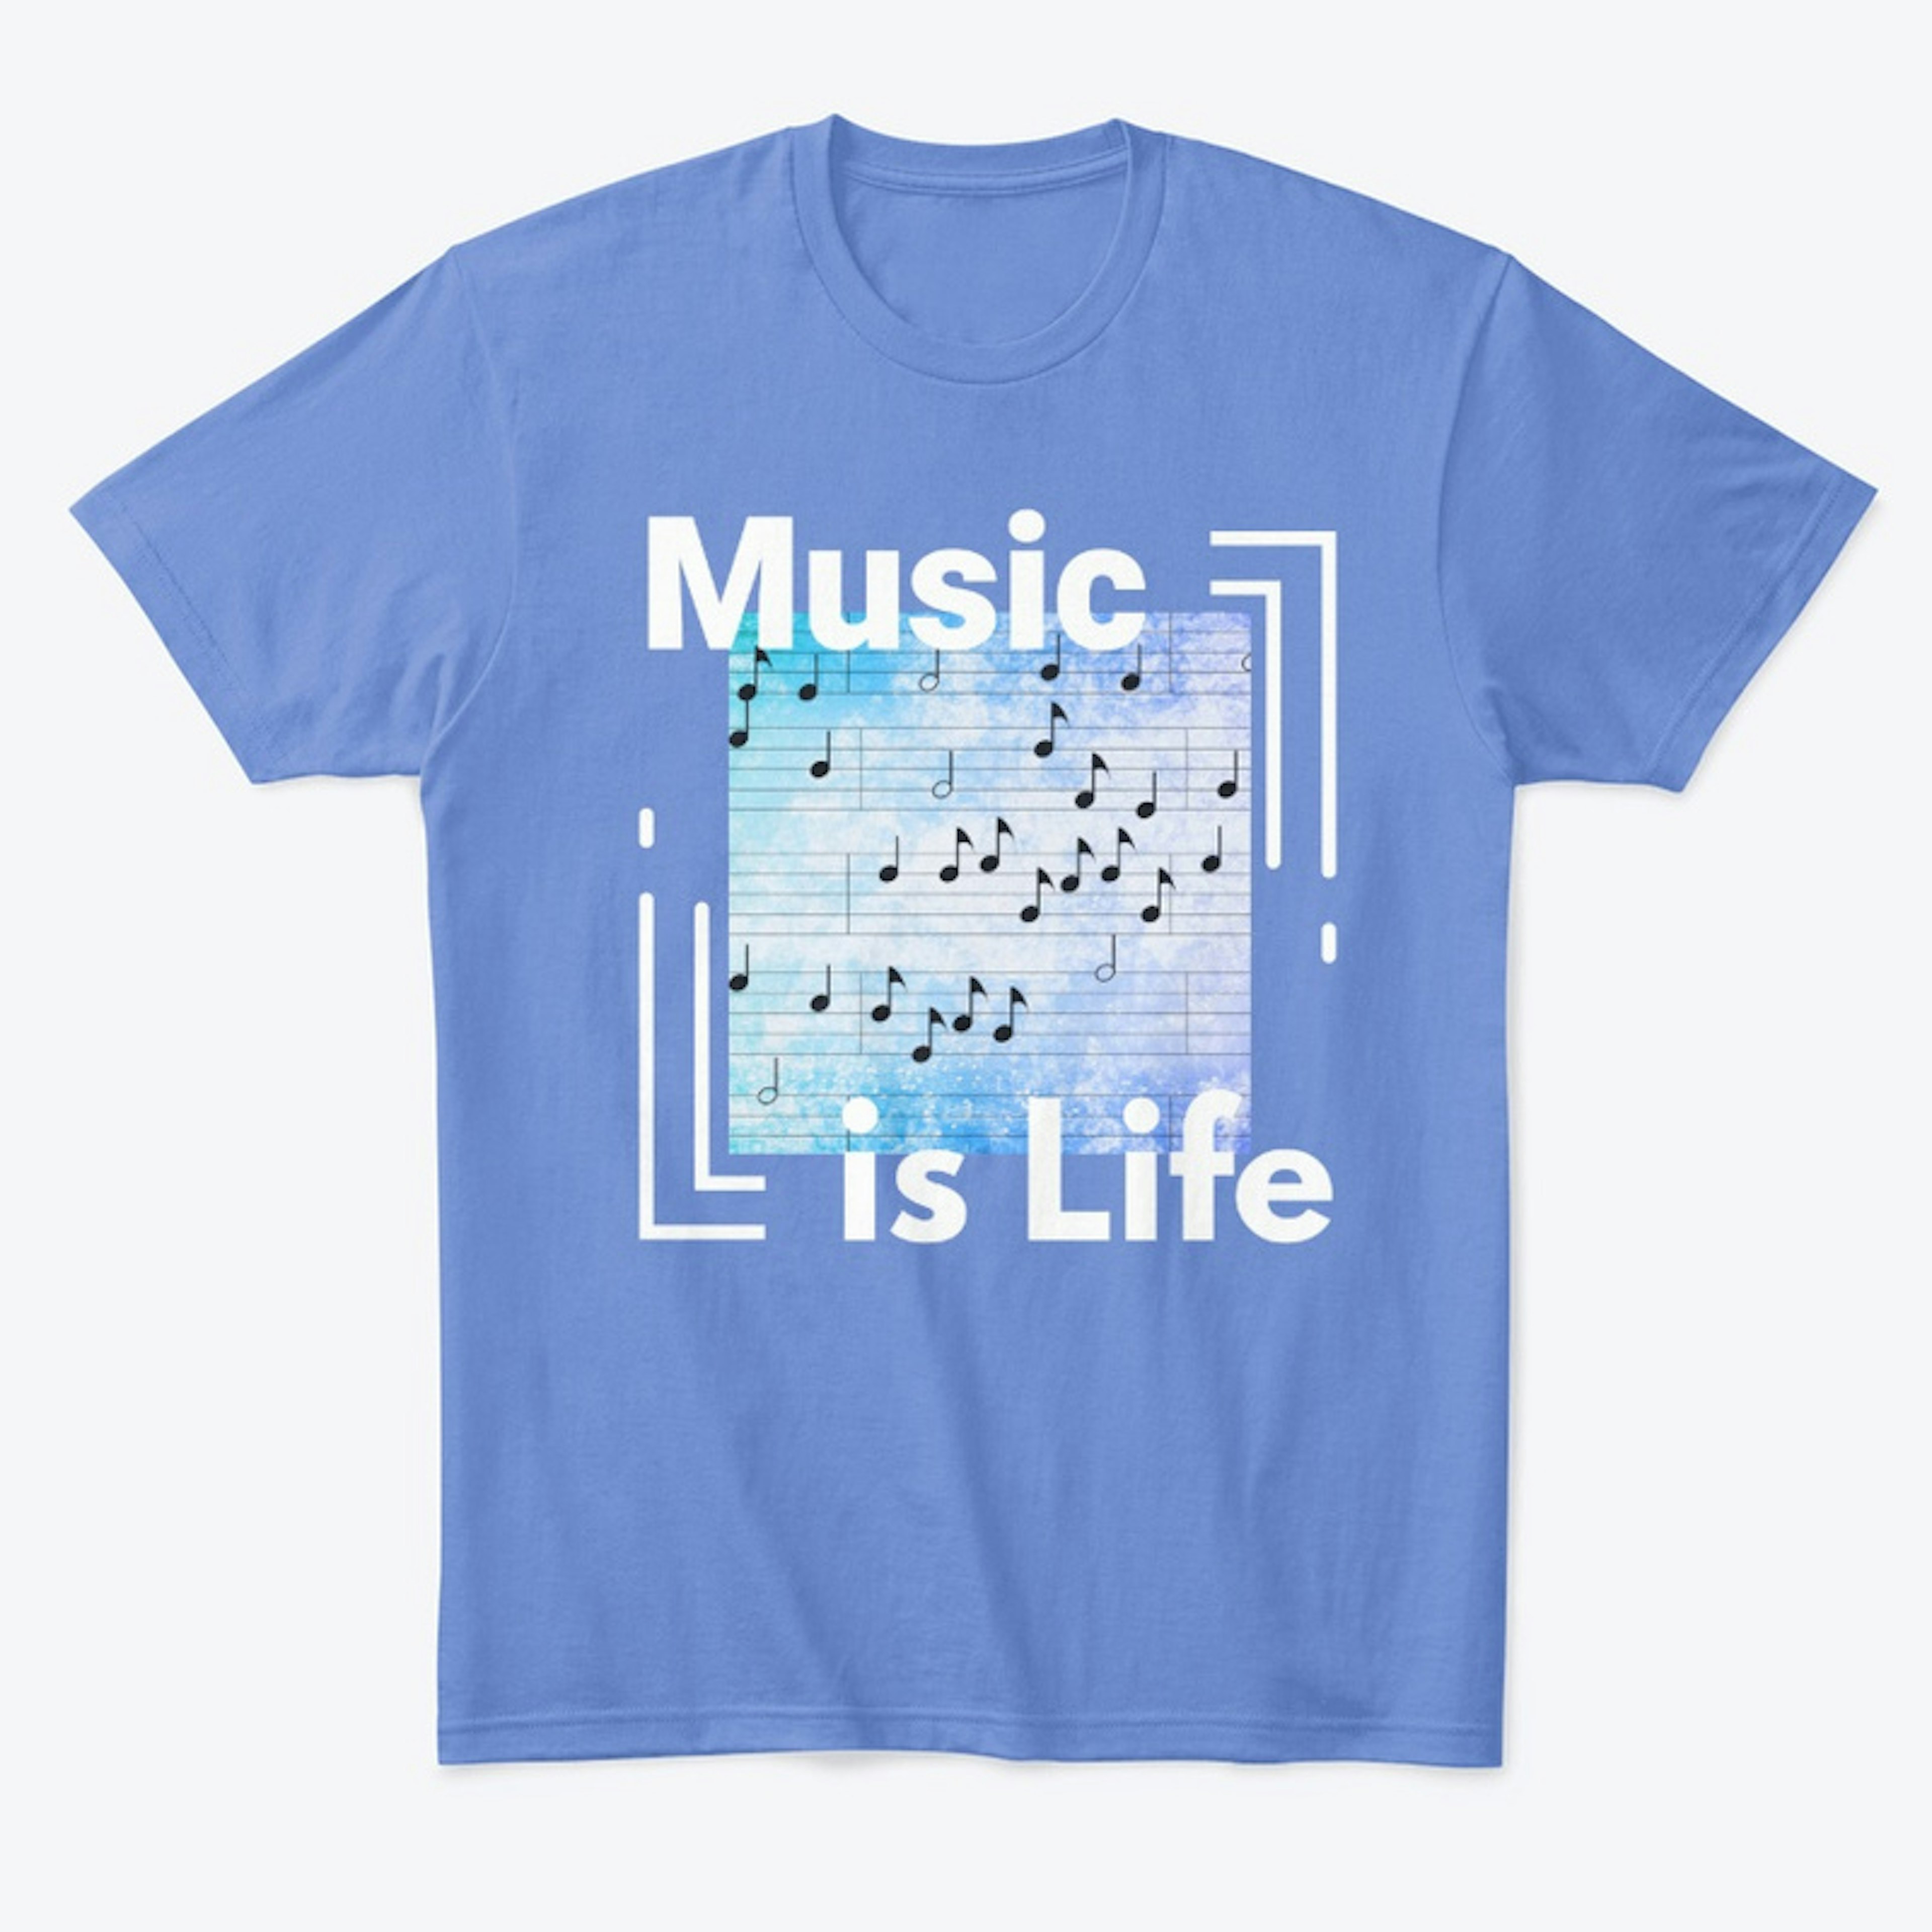 Music is Life (With Color)